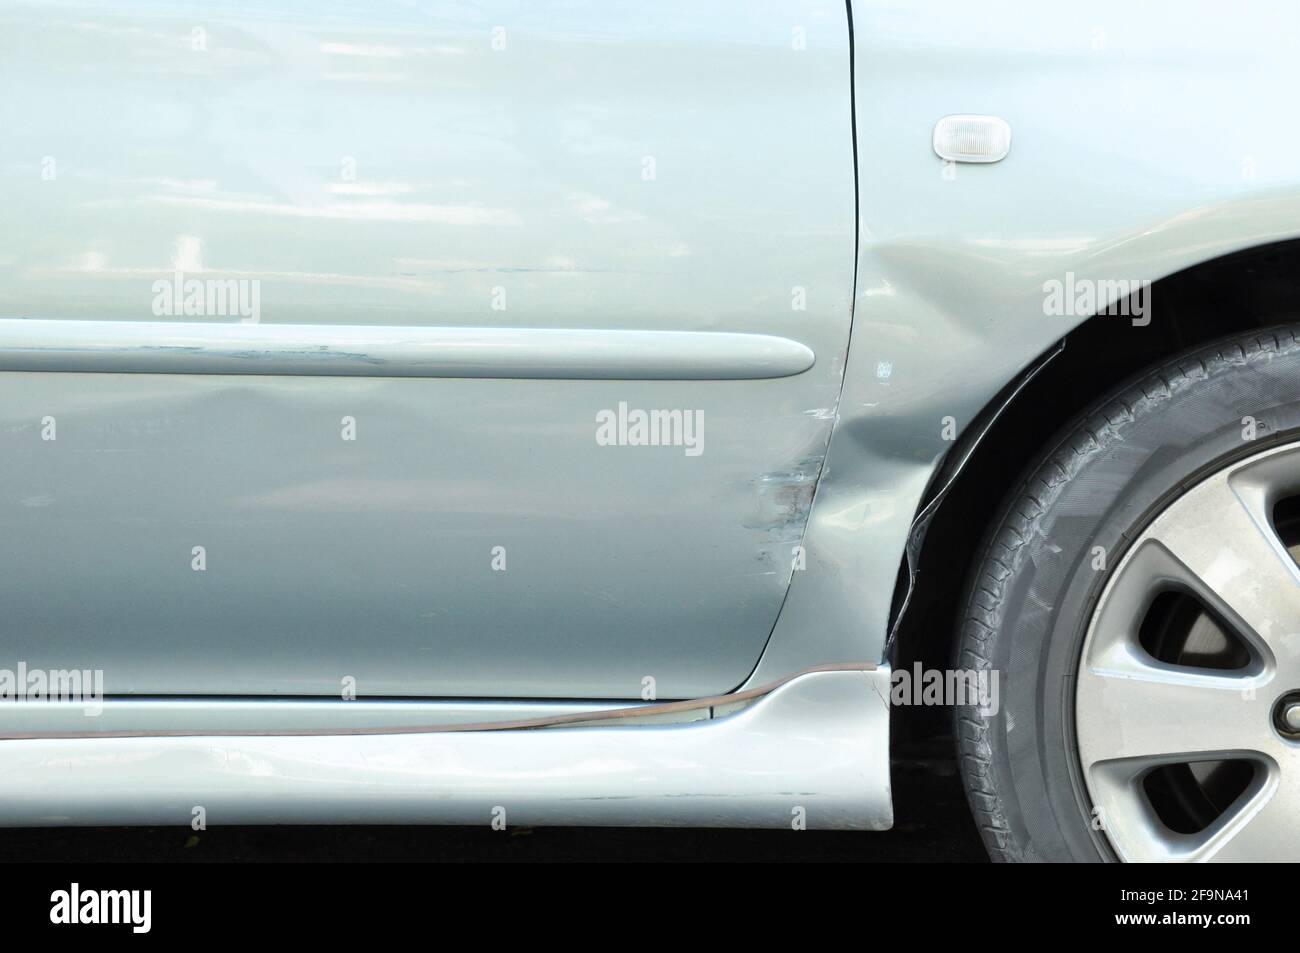 Damaged car with a dent near the wheel - can be considered as a fender bender Stock Photo